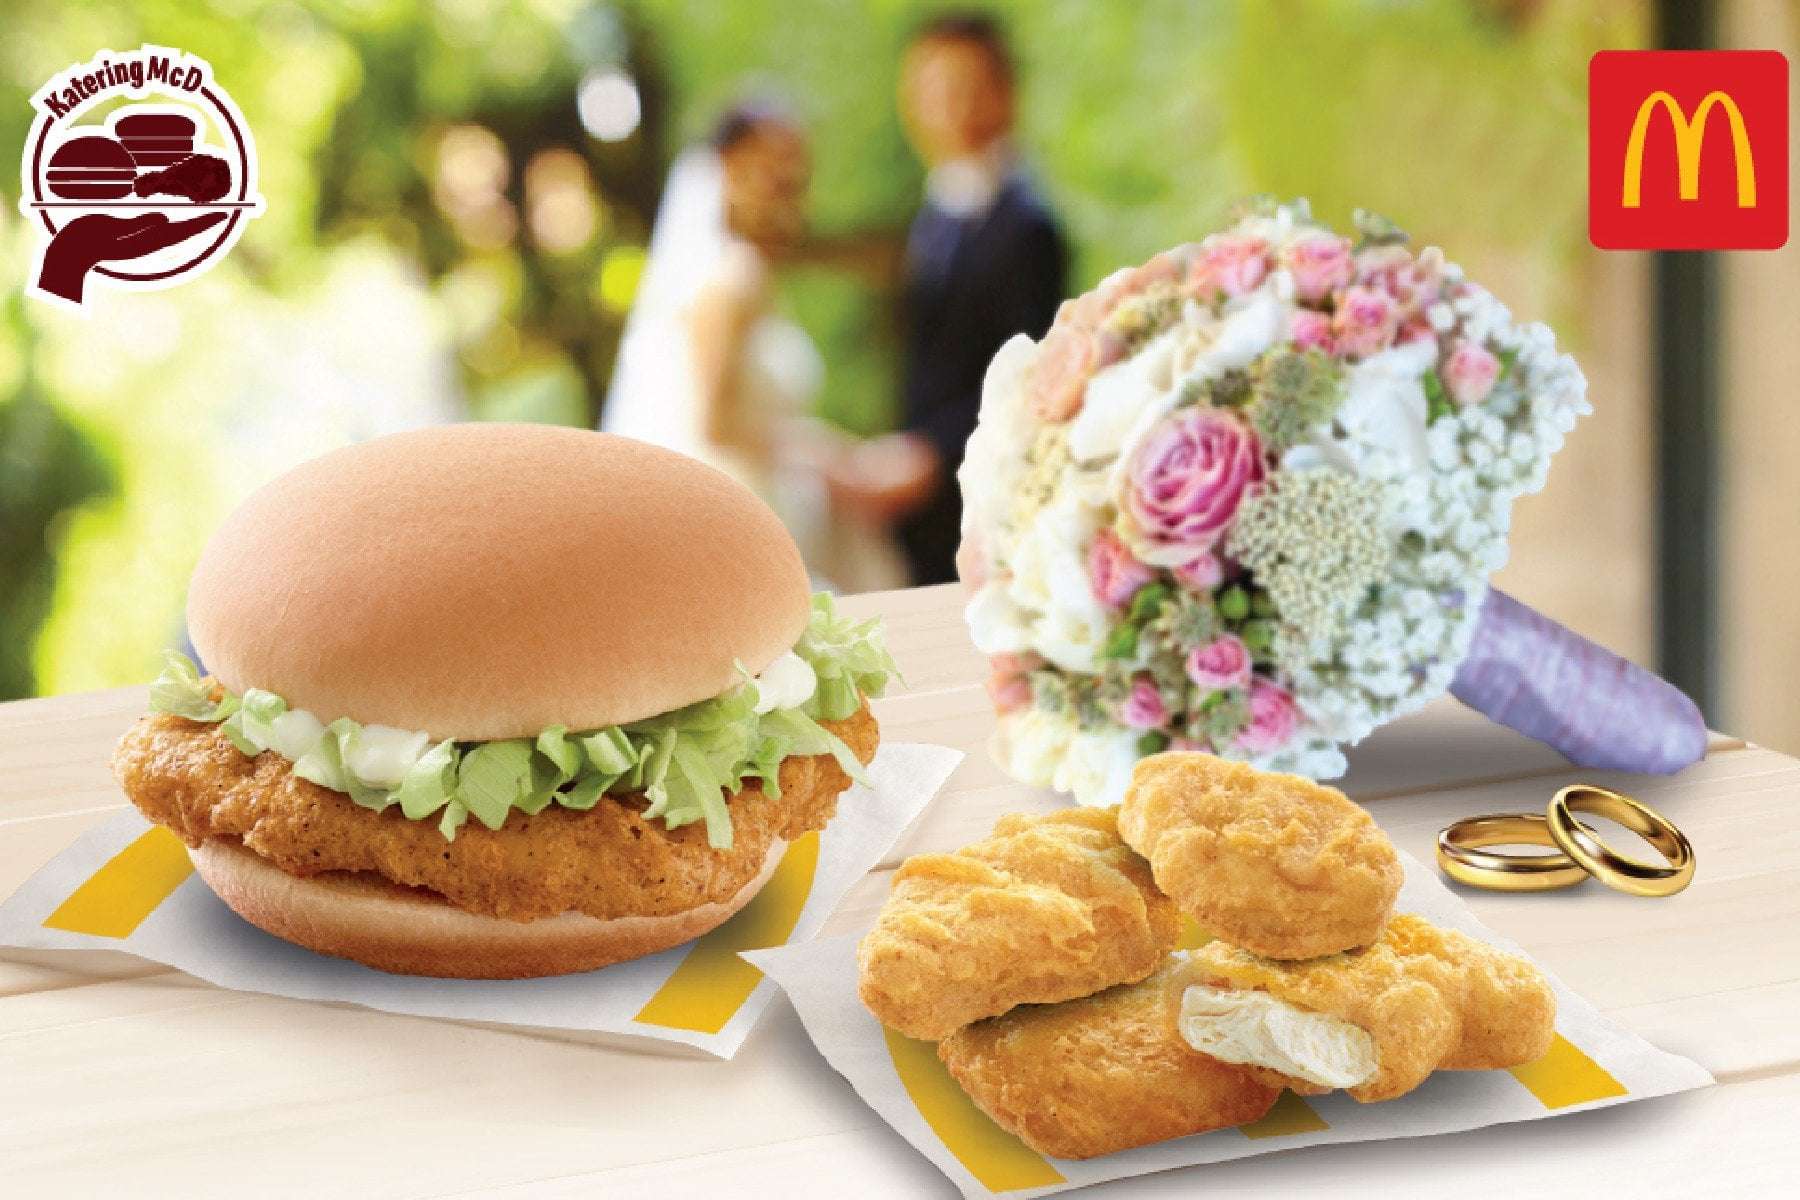 image for McDonald's $230 Wedding Package Sparks Avalanche of Jokes, Memes